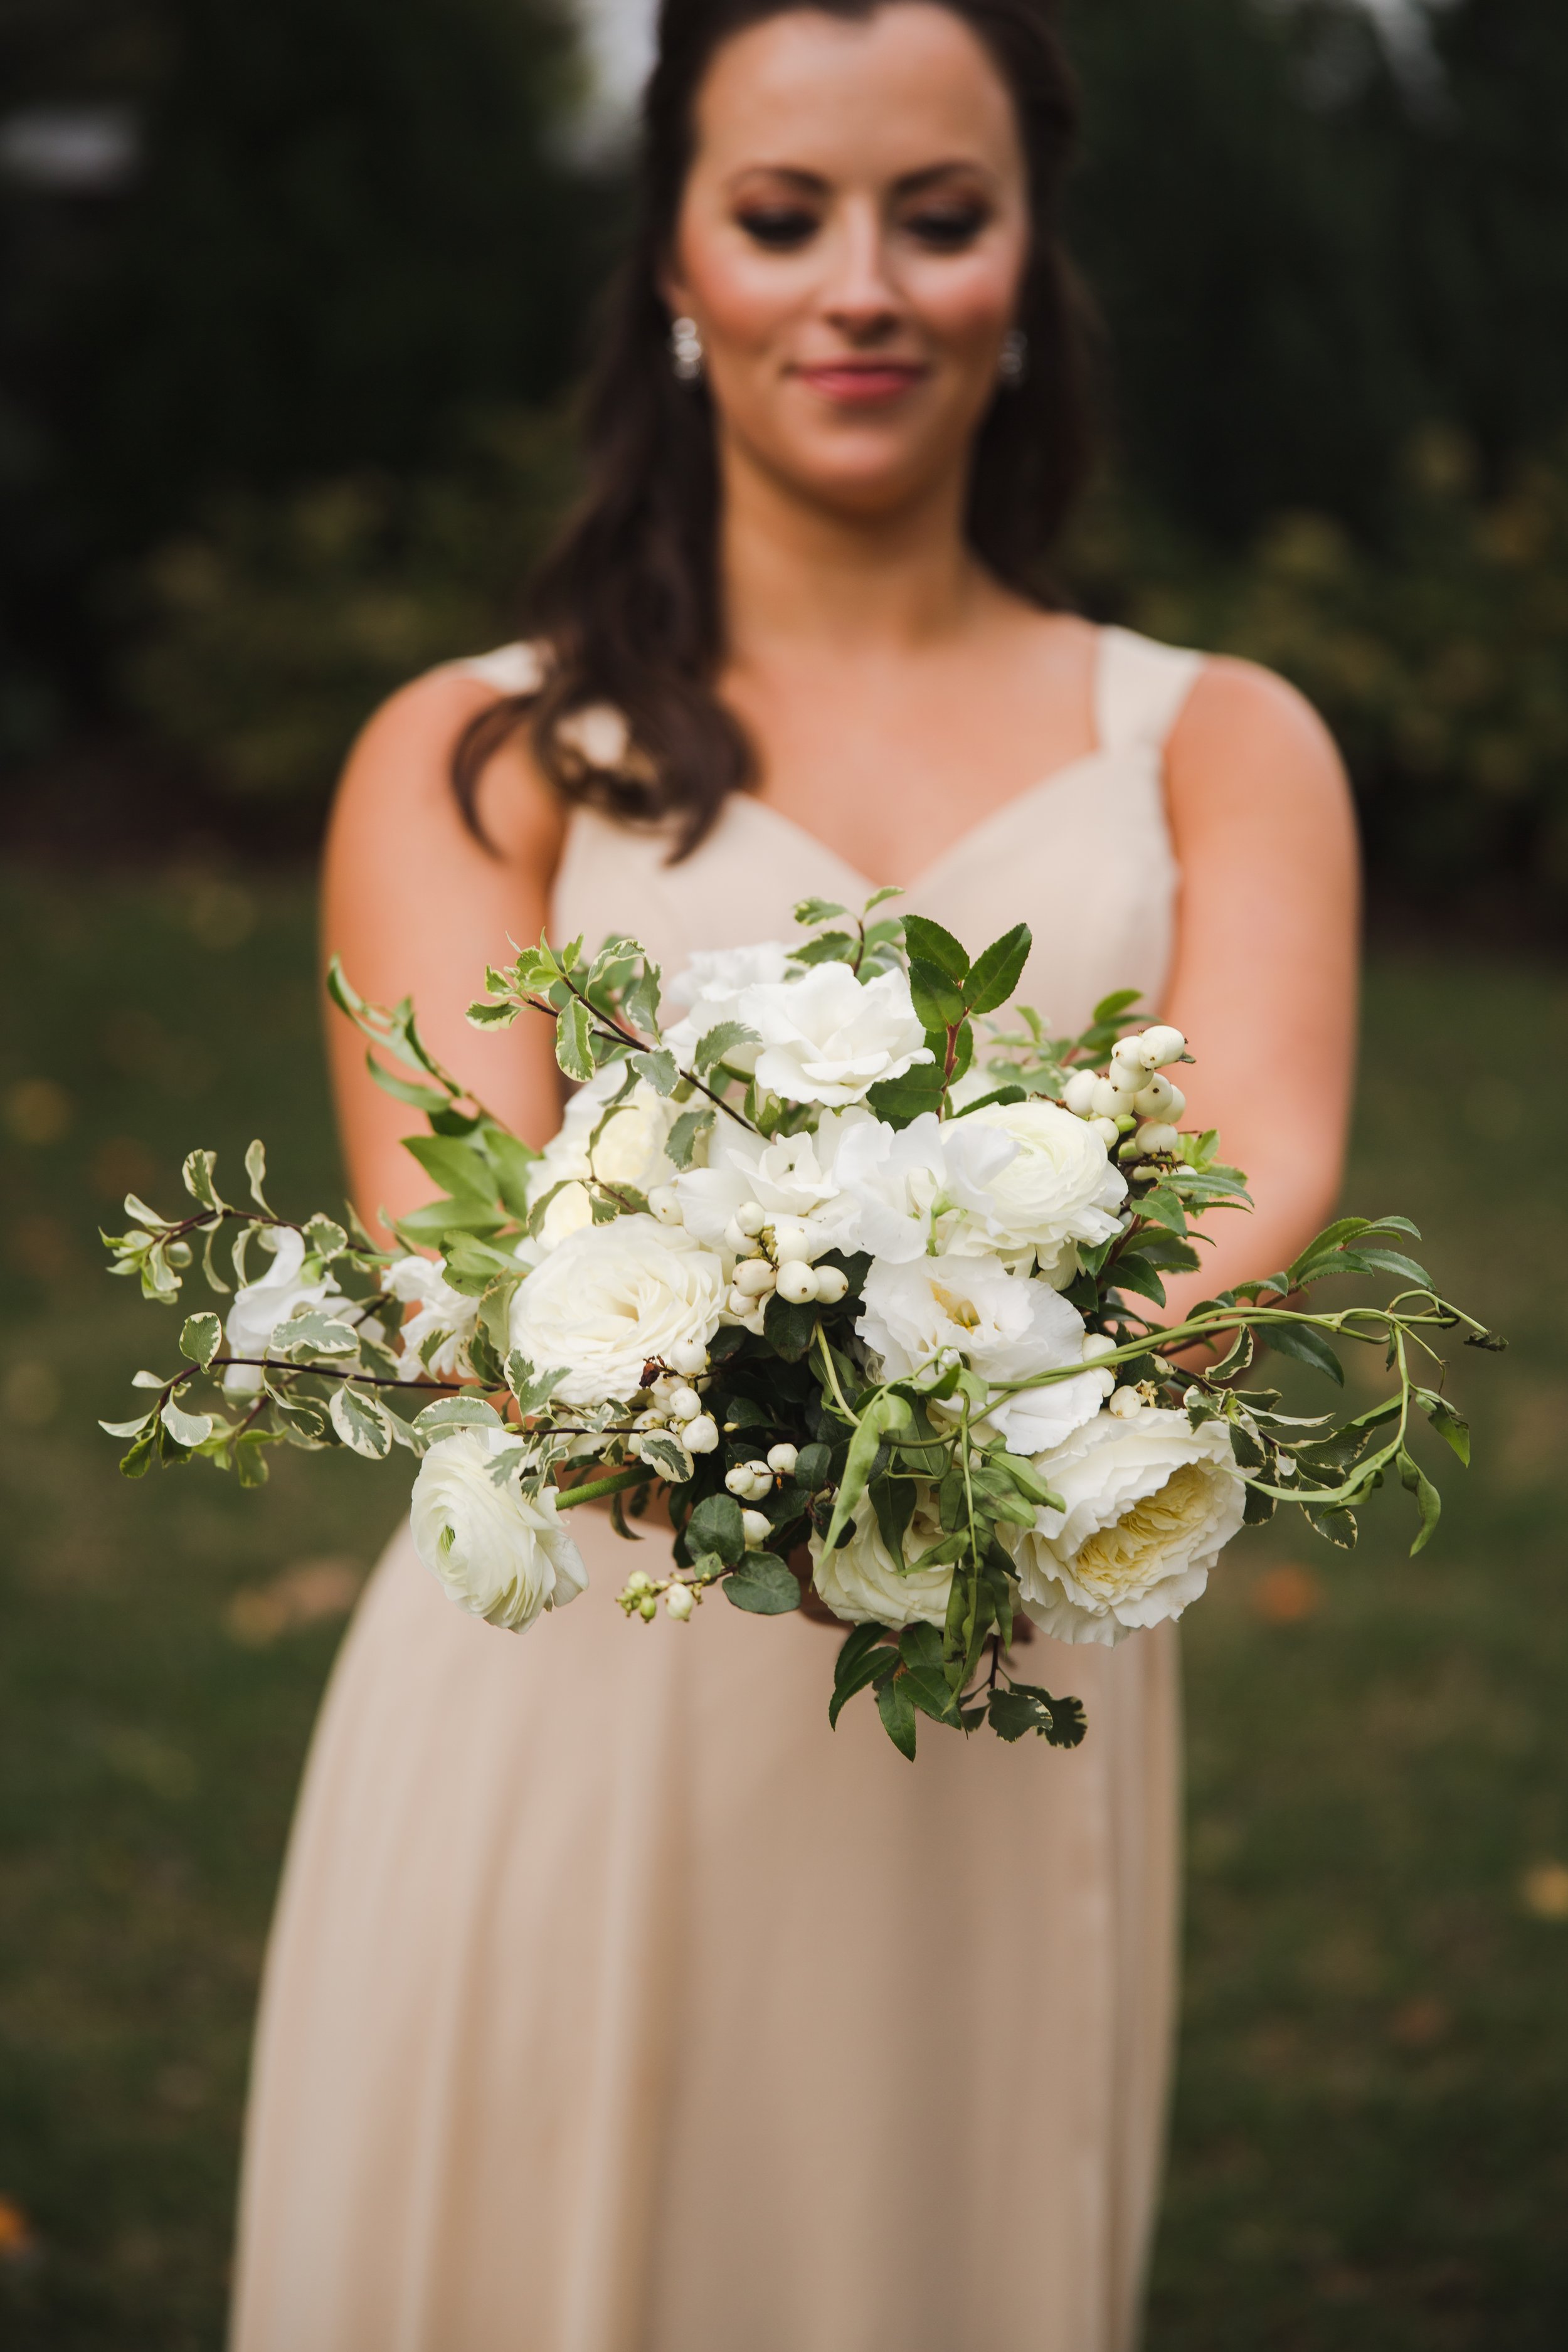 Bridal party florals for lush white and green wedding. Composed of petal-heavy roses, garden roses, ranunculus, sweet peas, berries, and greenery. Designed by Rosemary and Finch in Nashville, TN.